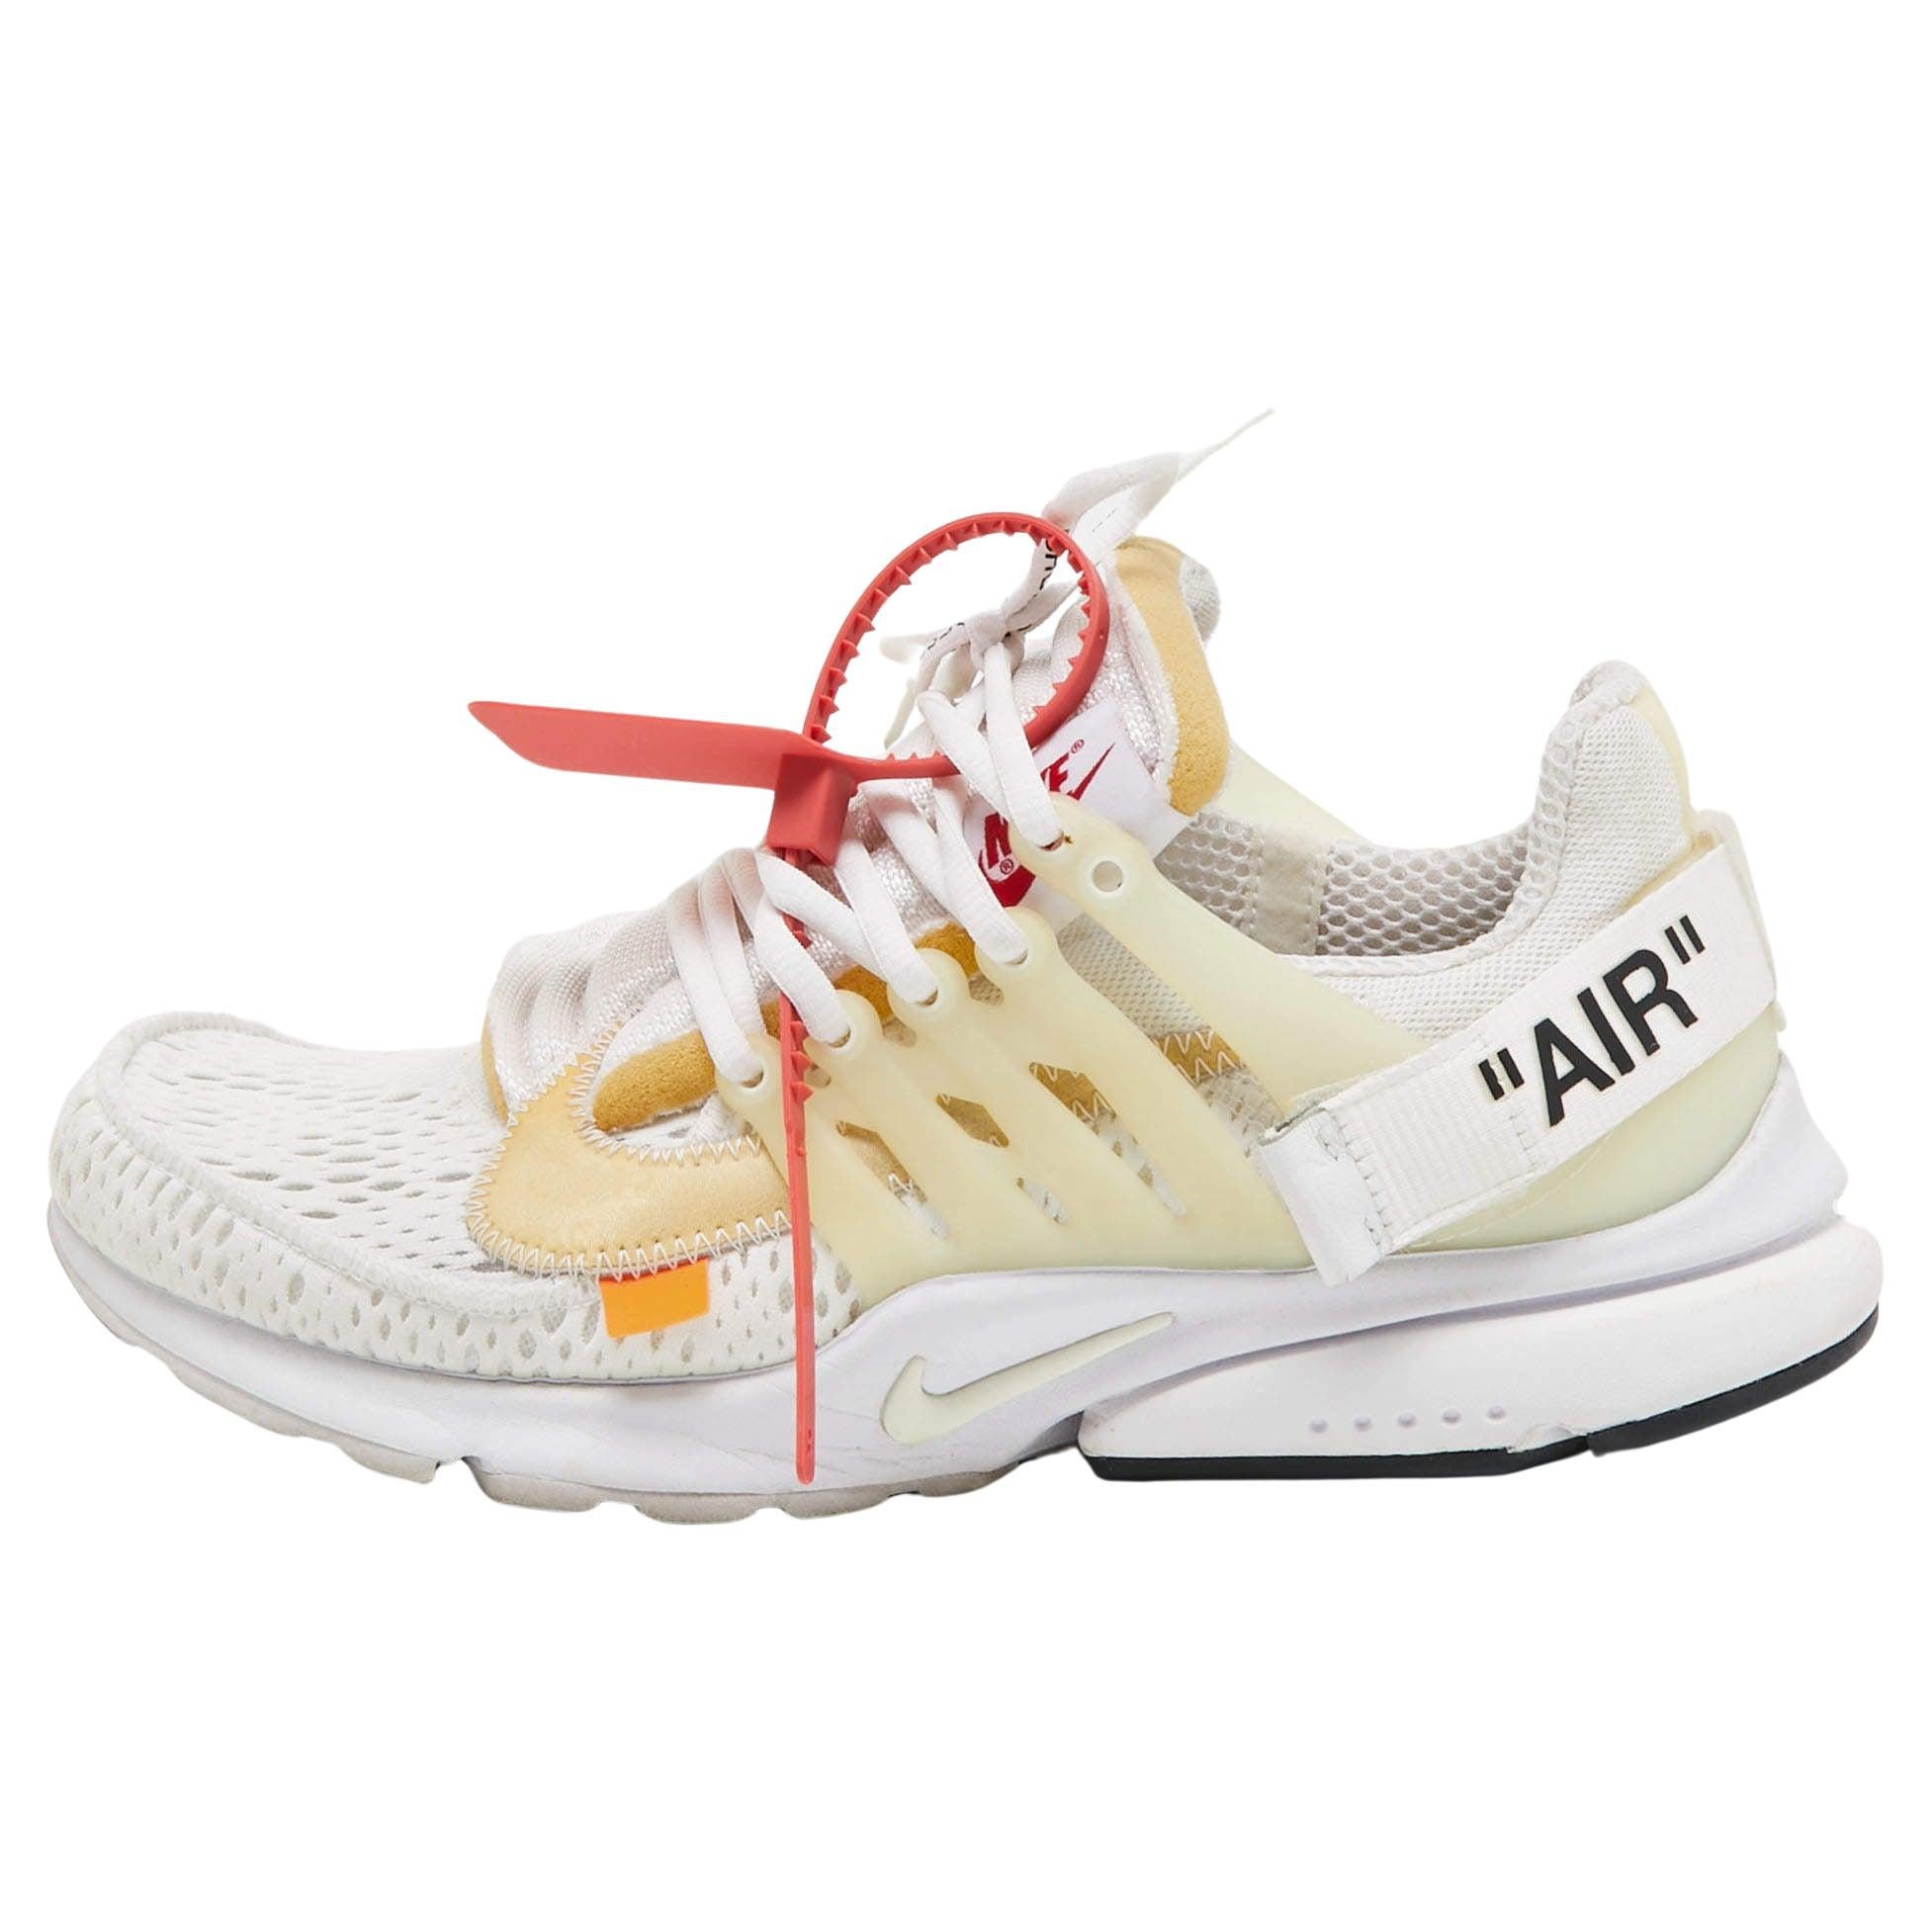 Nike x Off White White Fabric Air Presto Low Trainers Sneakers Size 42.5 For Sale